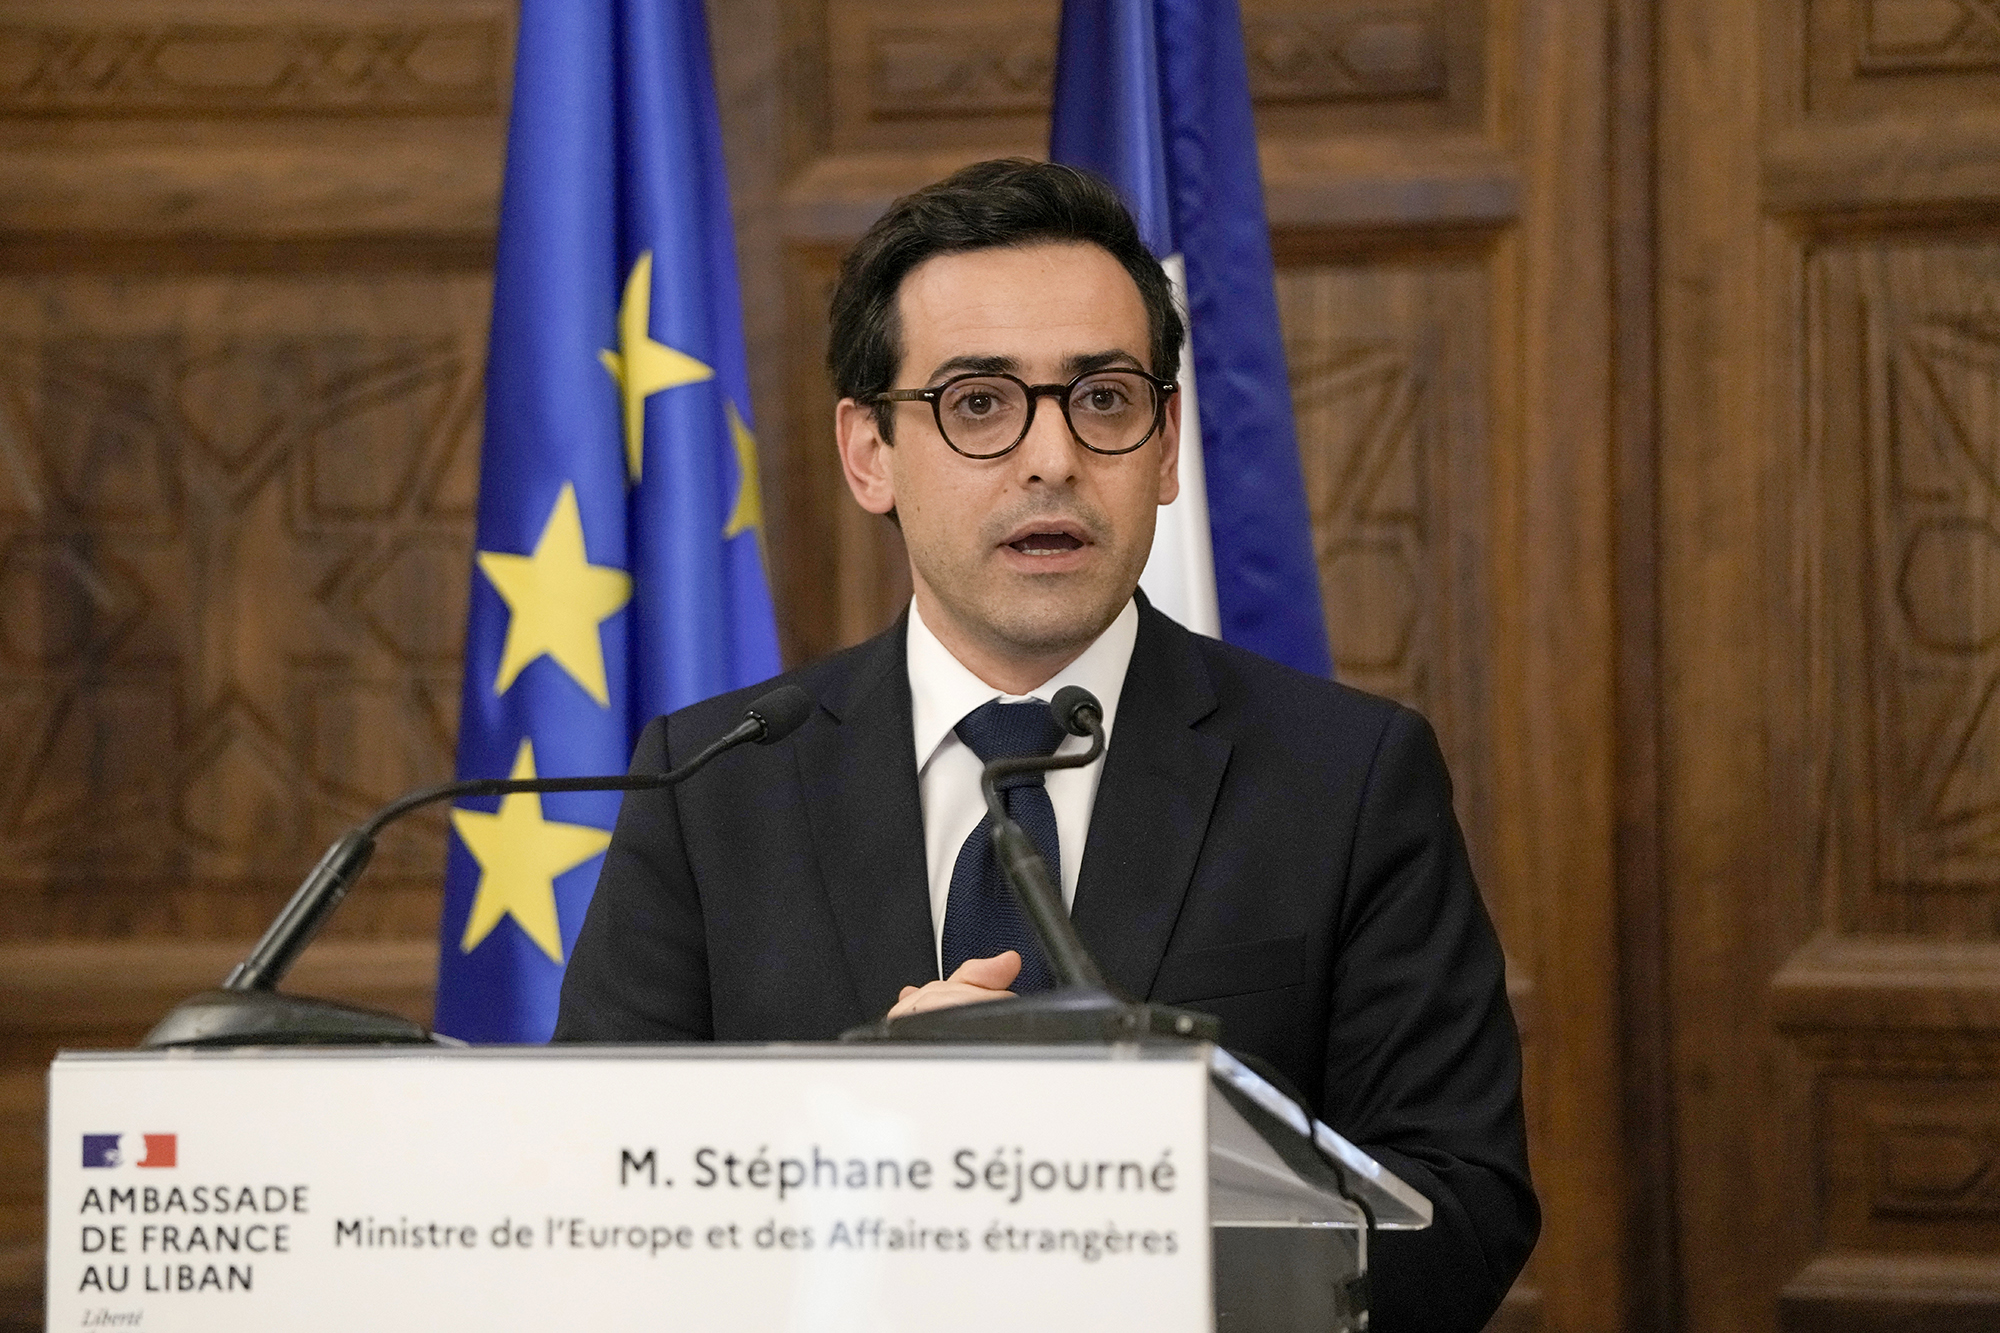 French Foreign Minister Stephane Sejourne speaks during a press conference at the Pine Palace, in Beirut, Lebanon, on April 28.